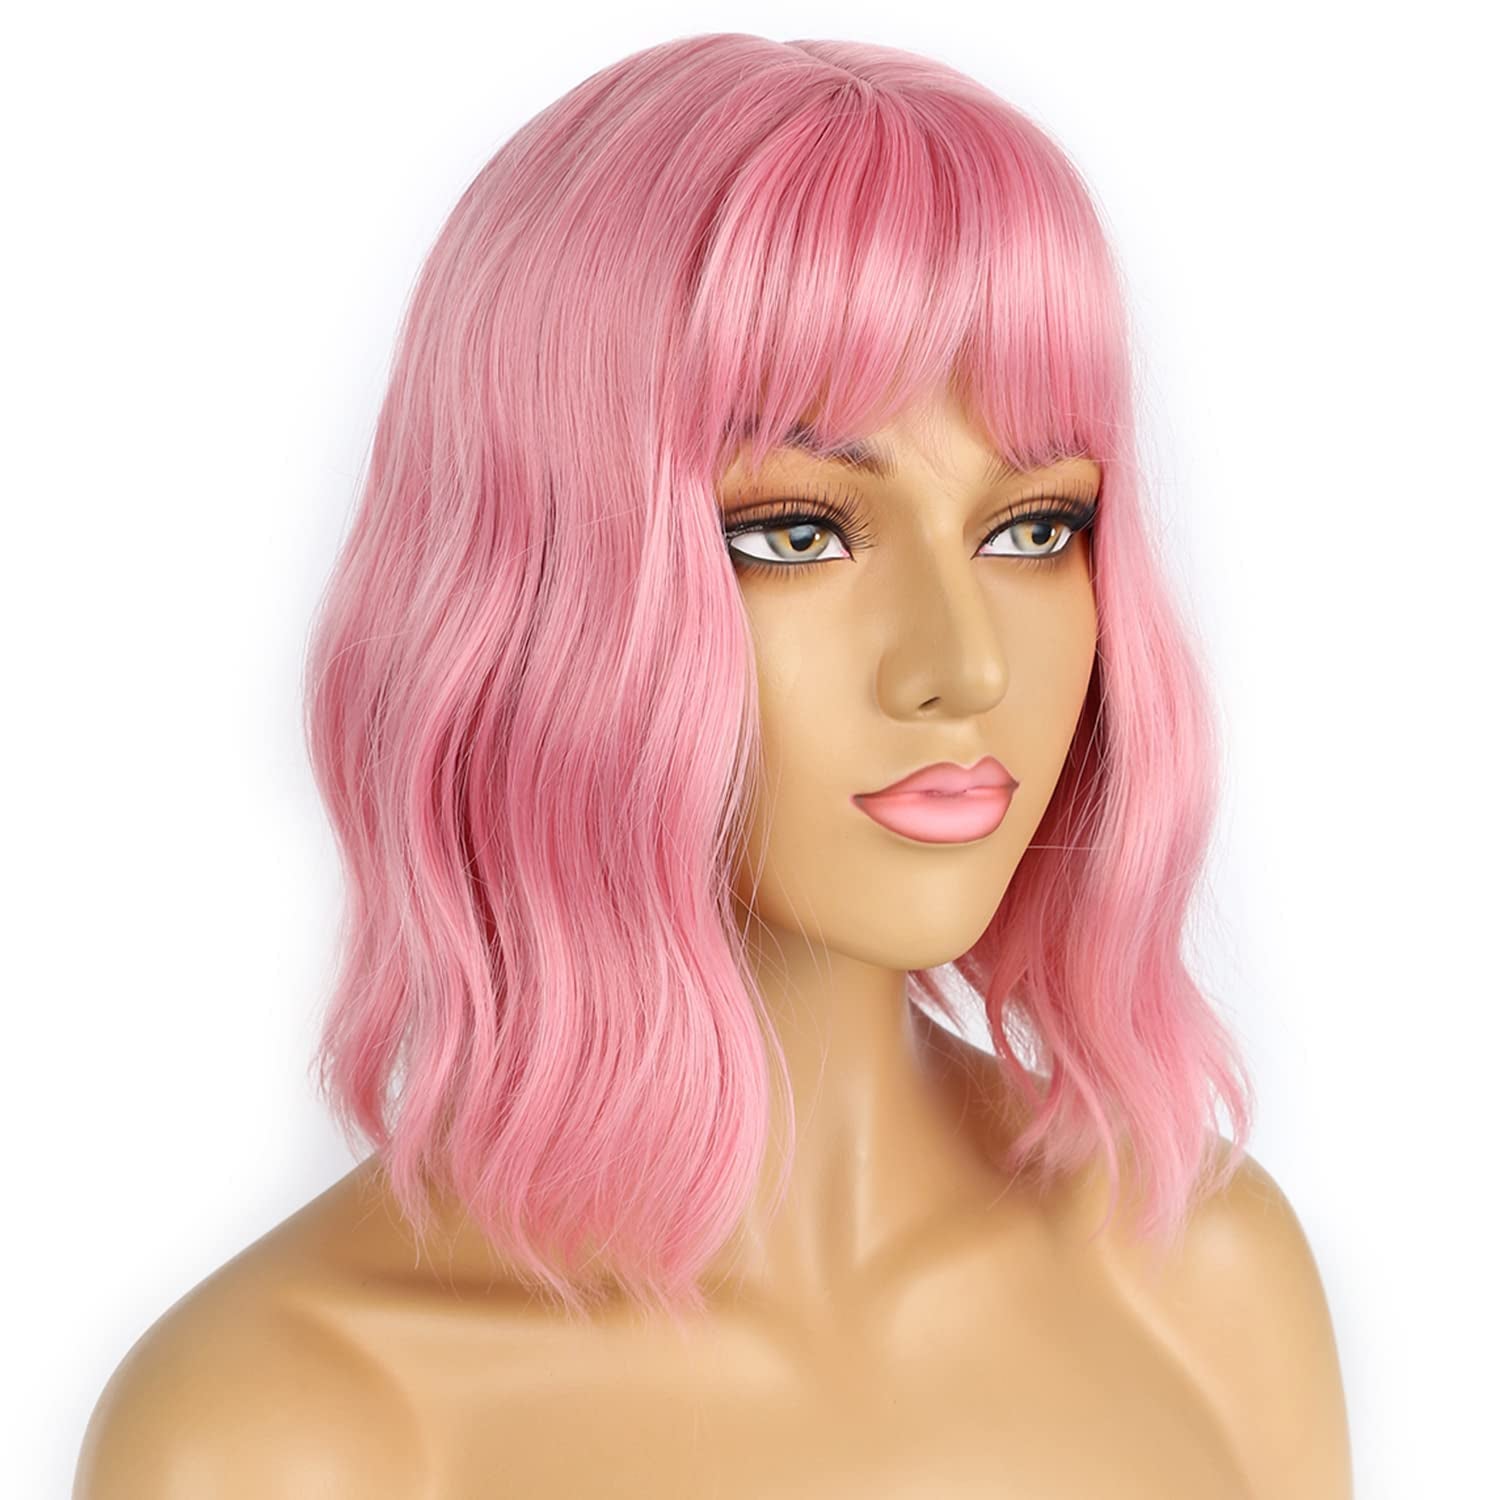 Short Curly Wavy Bob Pink Wig with Bangs, Shoulder Length Synthetic Hair Wigs Cosplay Party Wig for Women Girls Use 12 Inches (Pink)